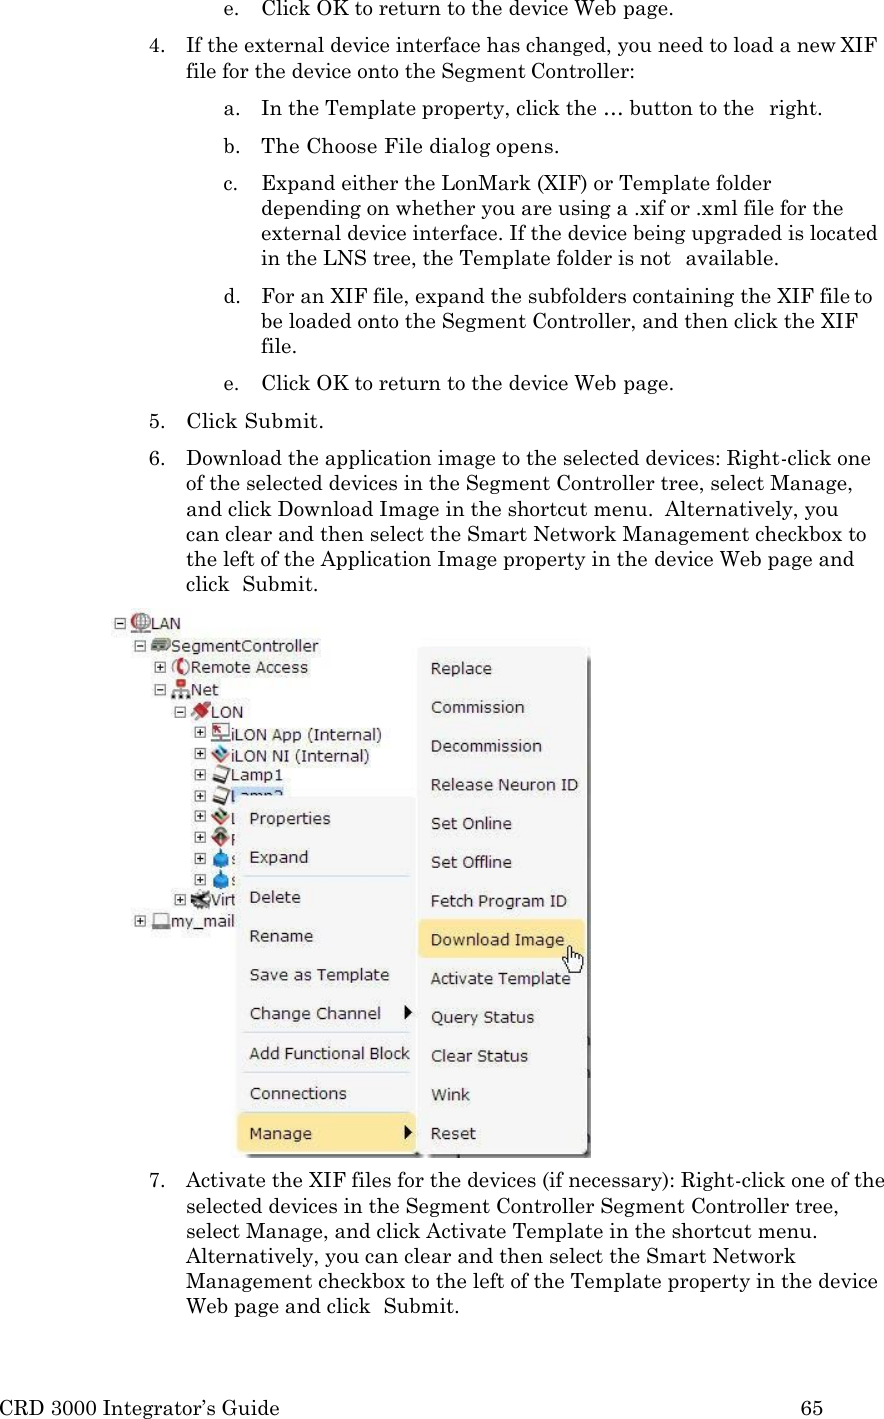 CRD 3000 Integrator’s Guide 65  e. Click OK to return to the device Web page. 4. If the external device interface has changed, you need to load a new XIF file for the device onto the Segment Controller: a. In the Template property, click the … button to the   right. b. The Choose File dialog opens. c. Expand either the LonMark (XIF) or Template folder   depending on whether you are using a .xif or .xml file for the external device interface. If the device being upgraded is located in the LNS tree, the Template folder is not   available. d. For an XIF file, expand the subfolders containing the XIF file to be loaded onto the Segment Controller, and then click the XIF file. e. Click OK to return to the device Web page. 5. Click Submit. 6. Download the application image to the selected devices: Right-click one of the selected devices in the Segment Controller tree, select Manage, and click Download Image in the shortcut menu.  Alternatively, you  can clear and then select the Smart Network Management checkbox to the left of the Application Image property in the device Web page and click  Submit. 7. Activate the XIF files for the devices (if necessary): Right-click one of the selected devices in the Segment Controller Segment Controller tree, select Manage, and click Activate Template in the shortcut menu. Alternatively, you can clear and then select the Smart Network Management checkbox to the left of the Template property in the device Web page and click  Submit. 